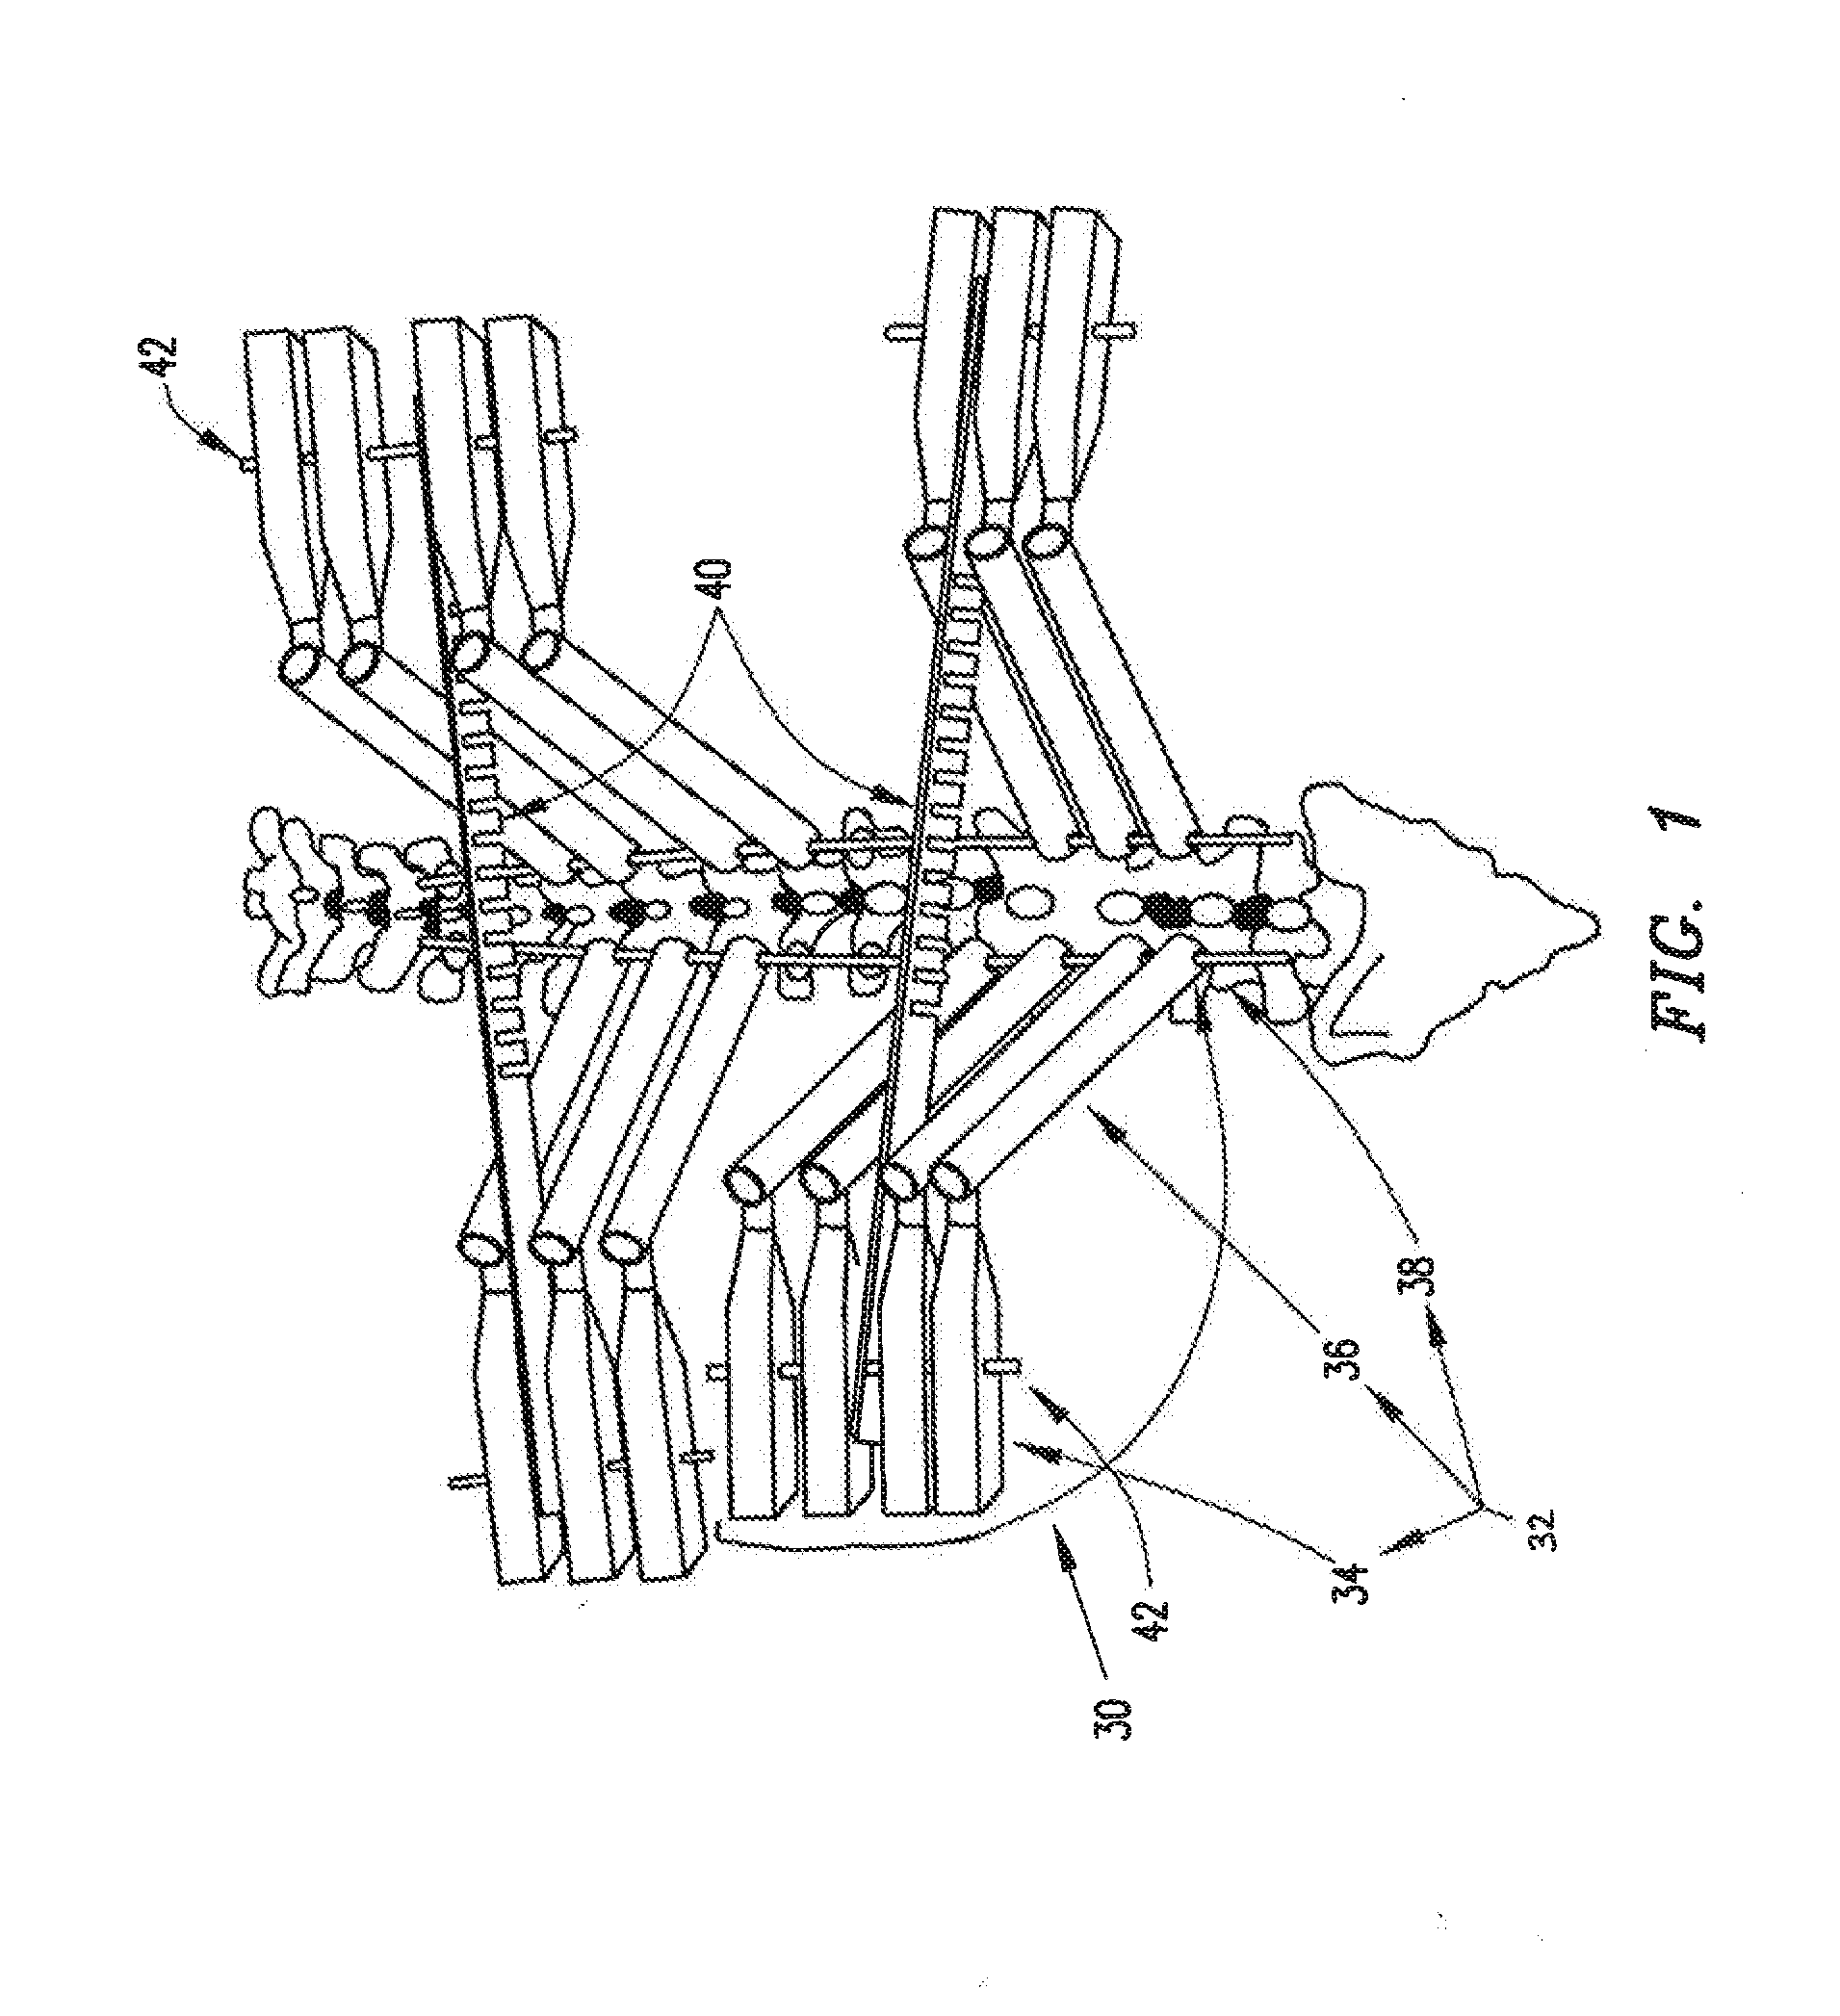 System and method for aligning vertebrae in the amelioration of aberrant spinal column deviation conditions